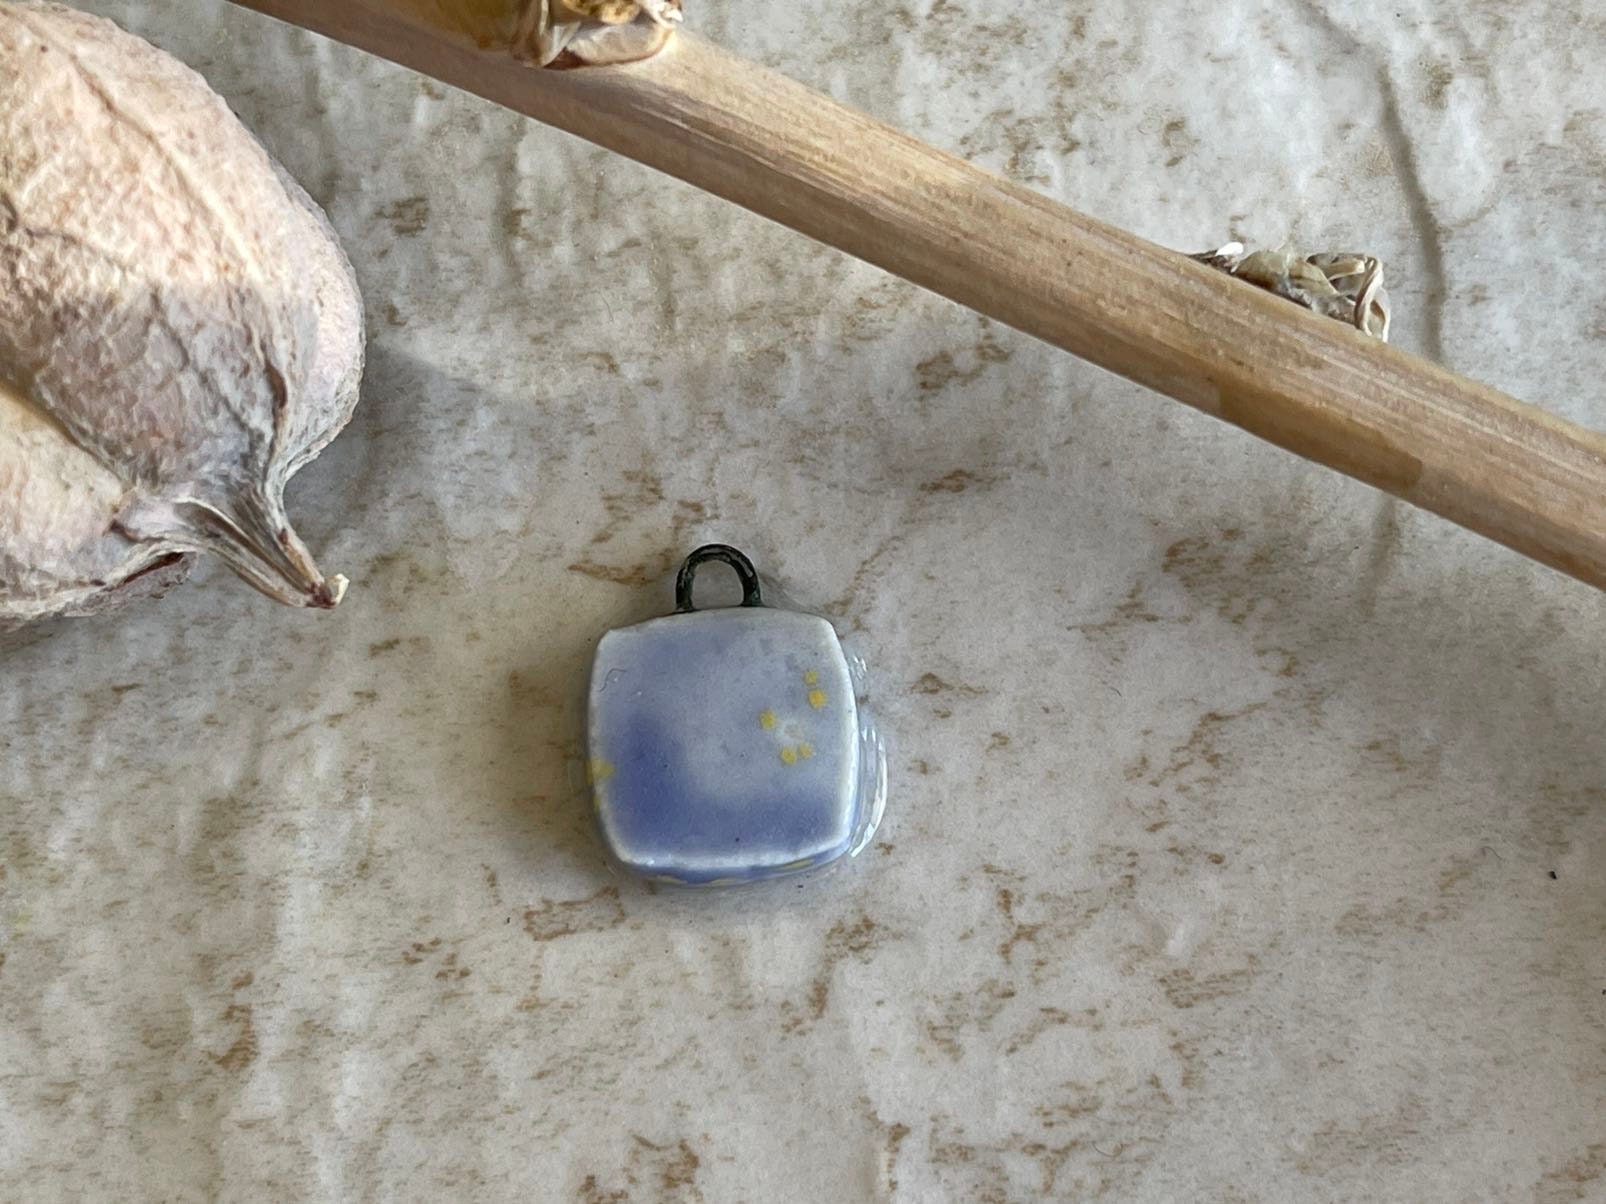 Tiny Blue and Gold Charm, Porcelain Beads, Ceramic Charms, Jewelry Making Components, DIY Beads